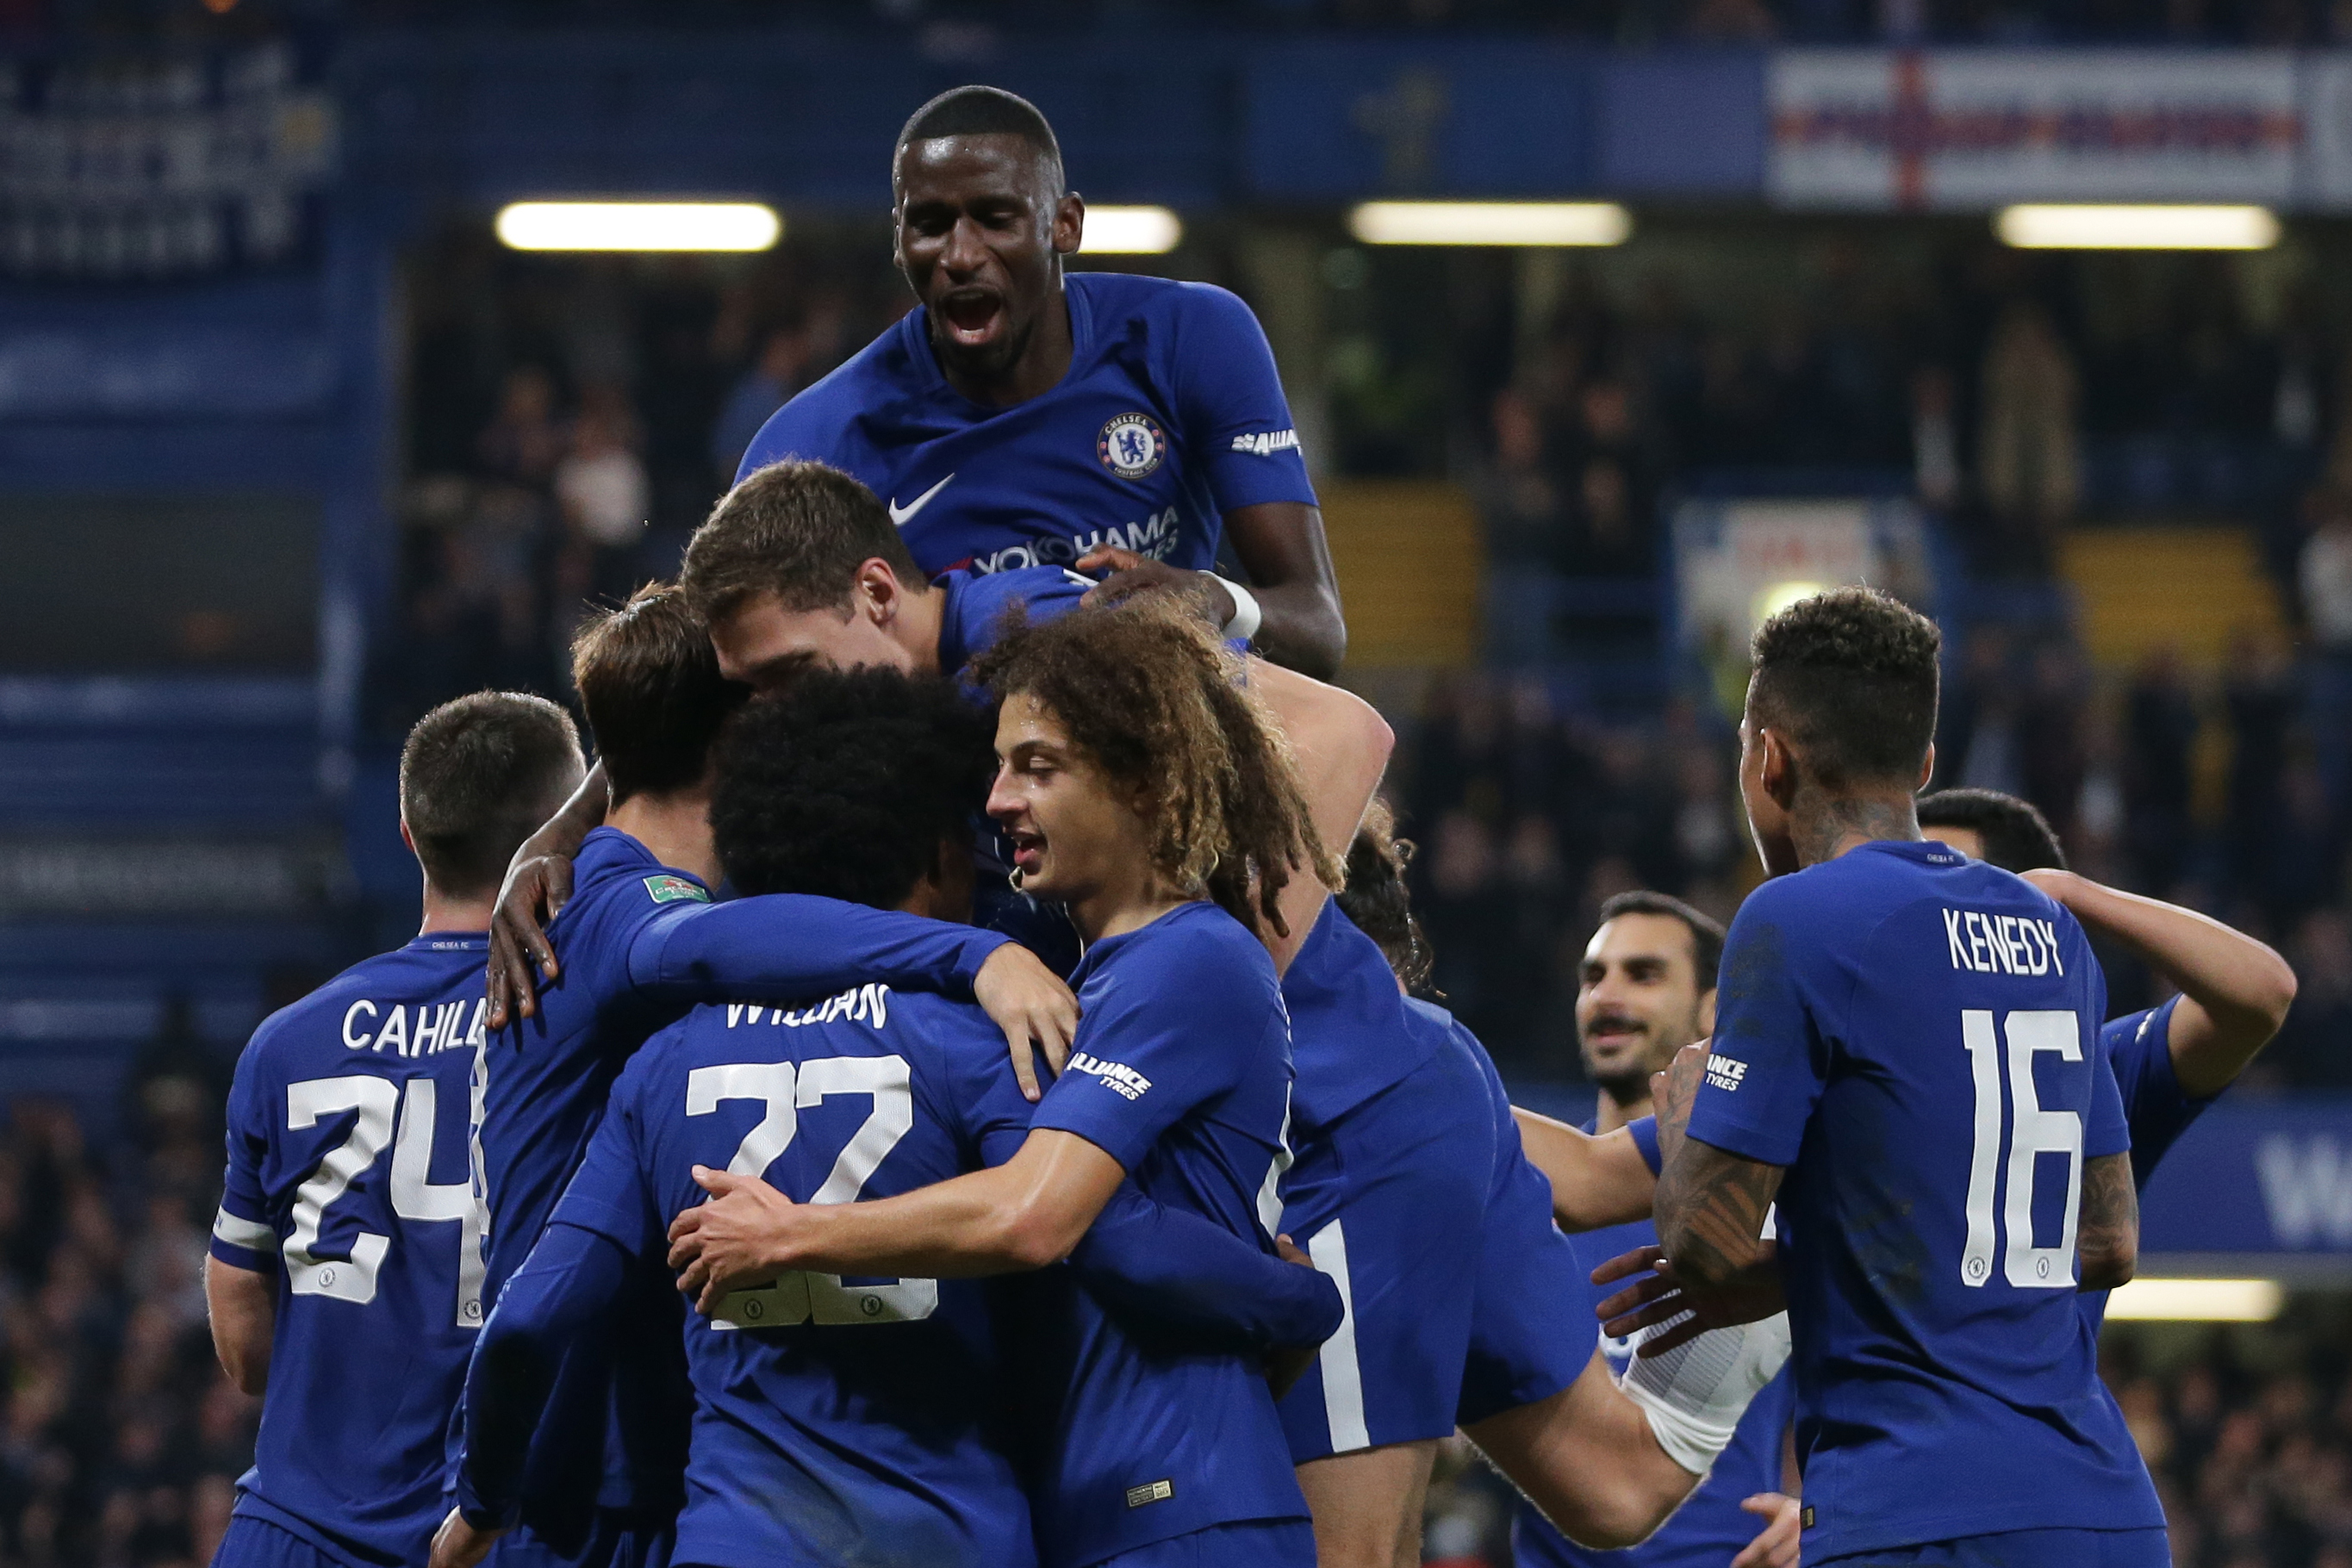 Chelsea's Brazilian midfielder Willian (C) celebrates with teammates after scoring their second goal during the English League Cup fourth round football match between Chelsea and Everton at Stamford Bridge in London on October 25, 2017. / AFP PHOTO / Daniel LEAL-OLIVAS / RESTRICTED TO EDITORIAL USE. No use with unauthorized audio, video, data, fixture lists, club/league logos or 'live' services. Online in-match use limited to 75 images, no video emulation. No use in betting, games or single club/league/player publications.  /         (Photo credit should read DANIEL LEAL-OLIVAS/AFP/Getty Images)